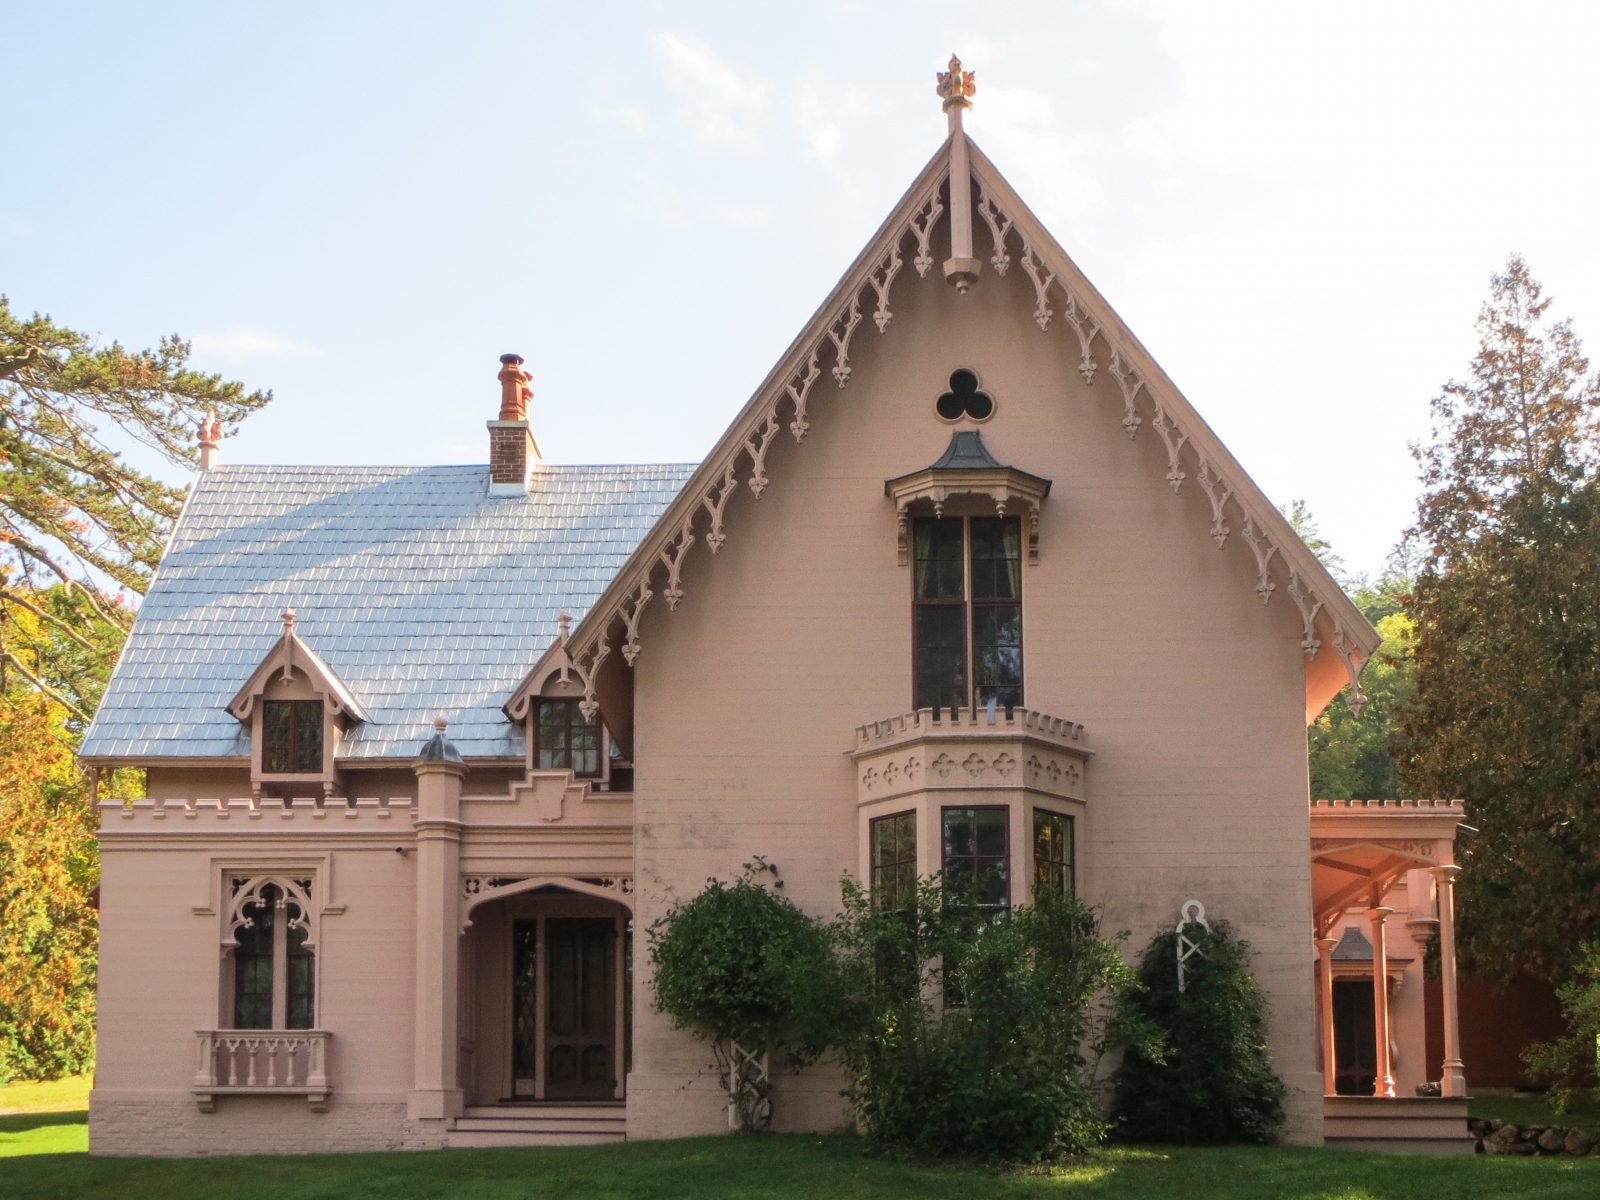 The historic Justin Morrill Homestead, the Gothic Revival-style home of U.S. Sen. Justin Smith Morrill in Strafford, Vt., has pressed metal roof shingles. Photo by Adrienne Dickerson.